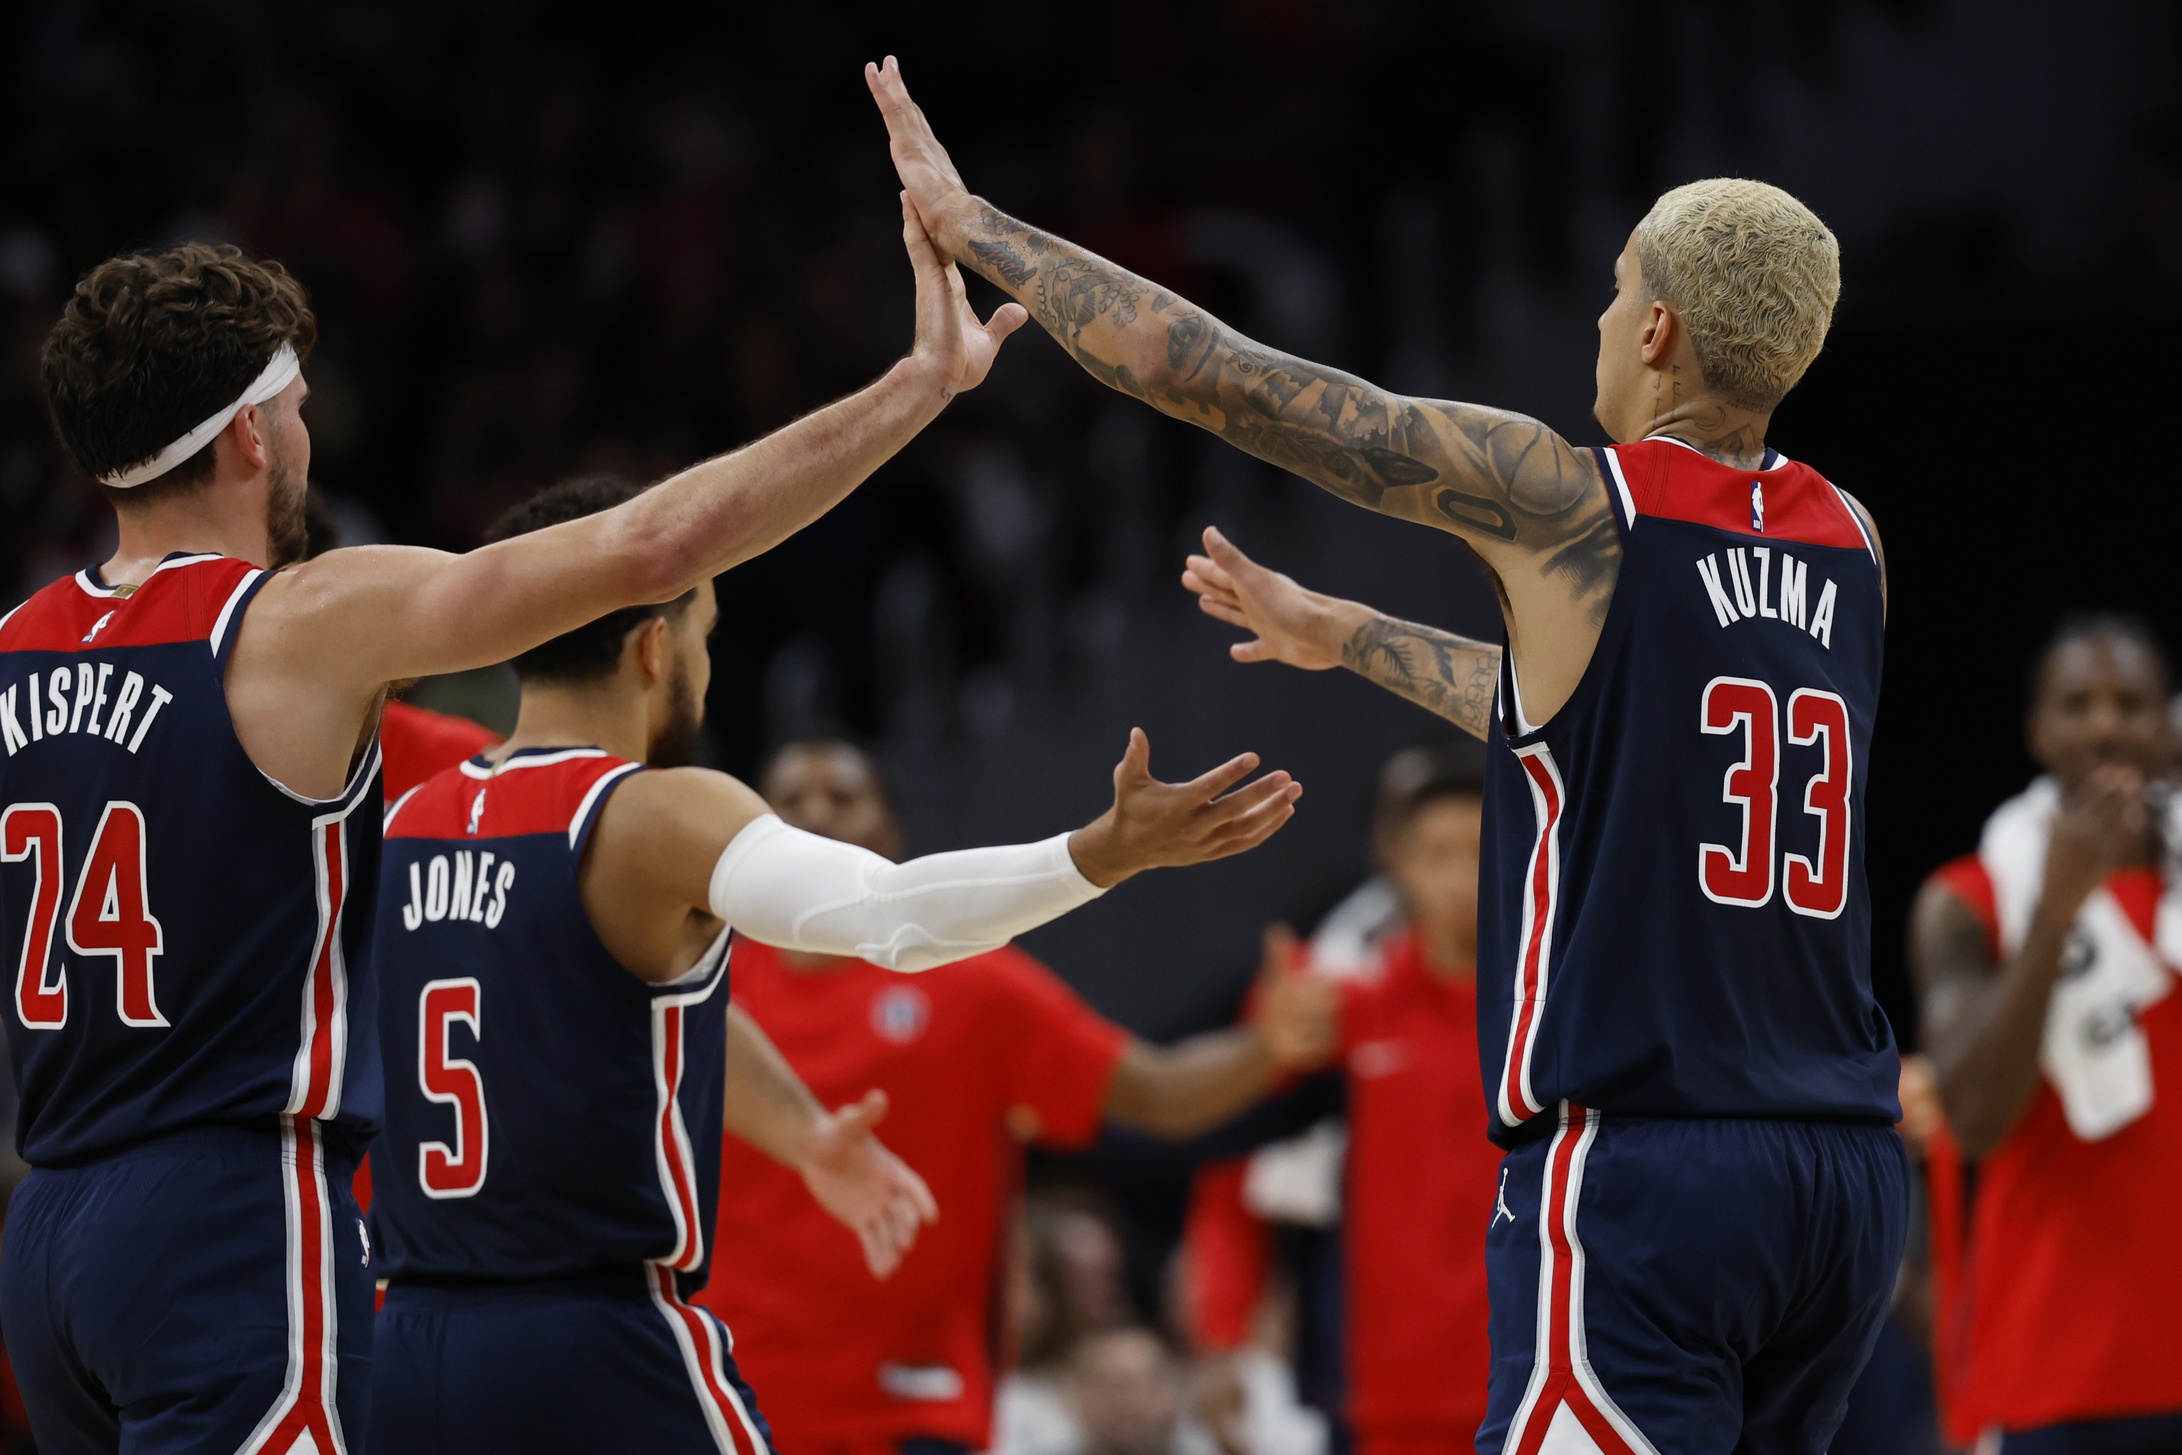 Oct 28, 2023; Washington, District of Columbia, USA; Washington Wizards forward Kyle Kuzma (33) celebrates with Wizards forward Corey Kispert (24) against the Memphis Grizzlies in the second quarter at Capital One Arena. Mandatory Credit: Geoff Burke-USA TODAY Sports